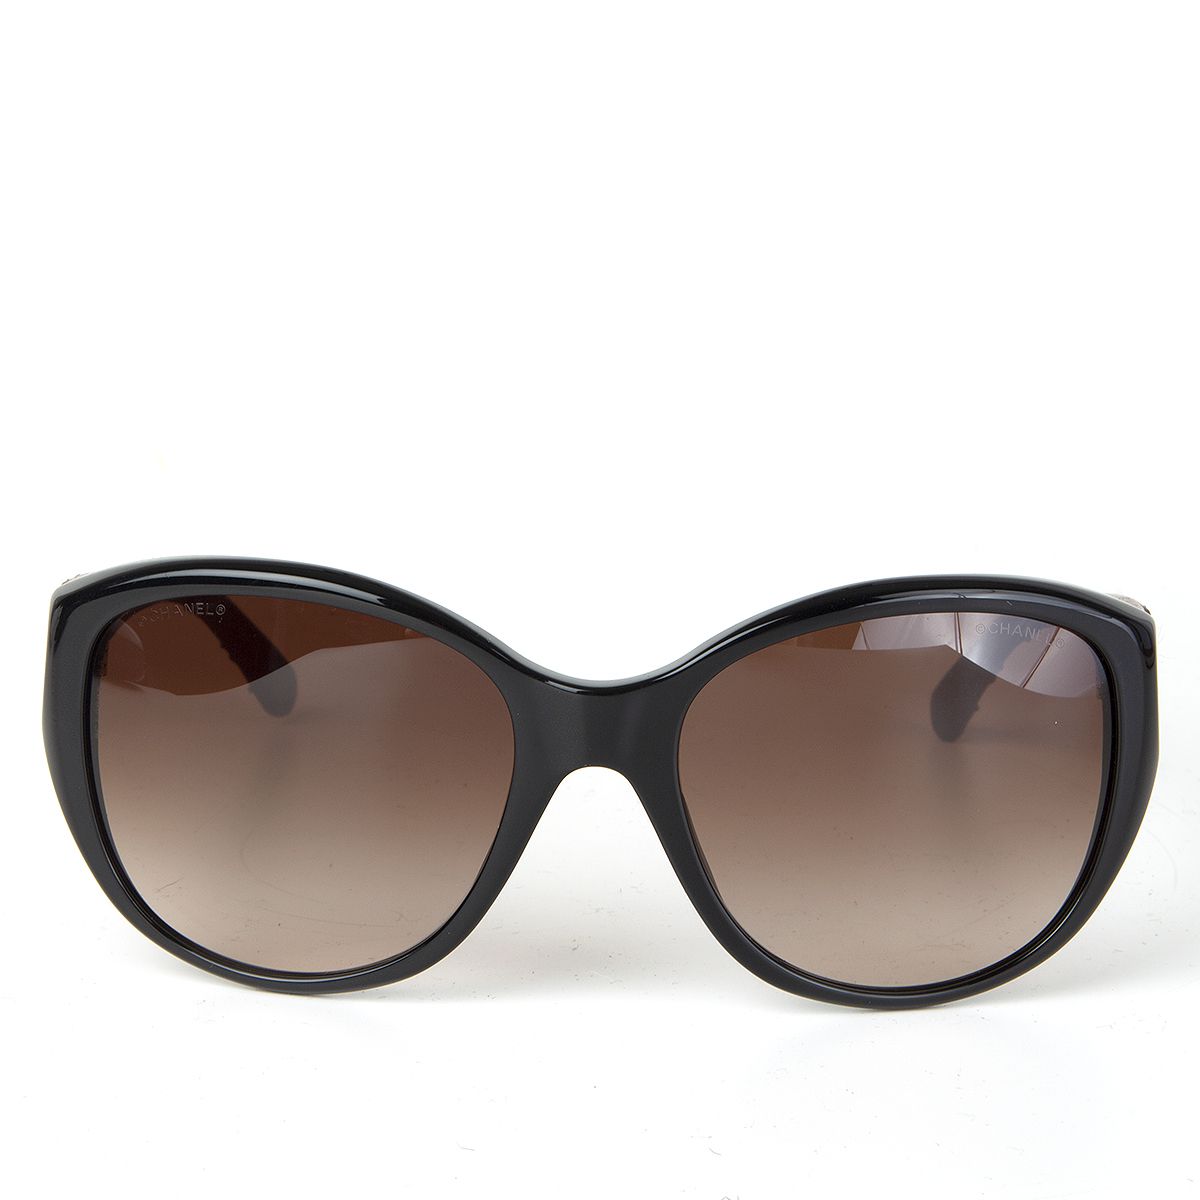 Chanel Sunglasses Quilted Leather Sides Cat Eye Front